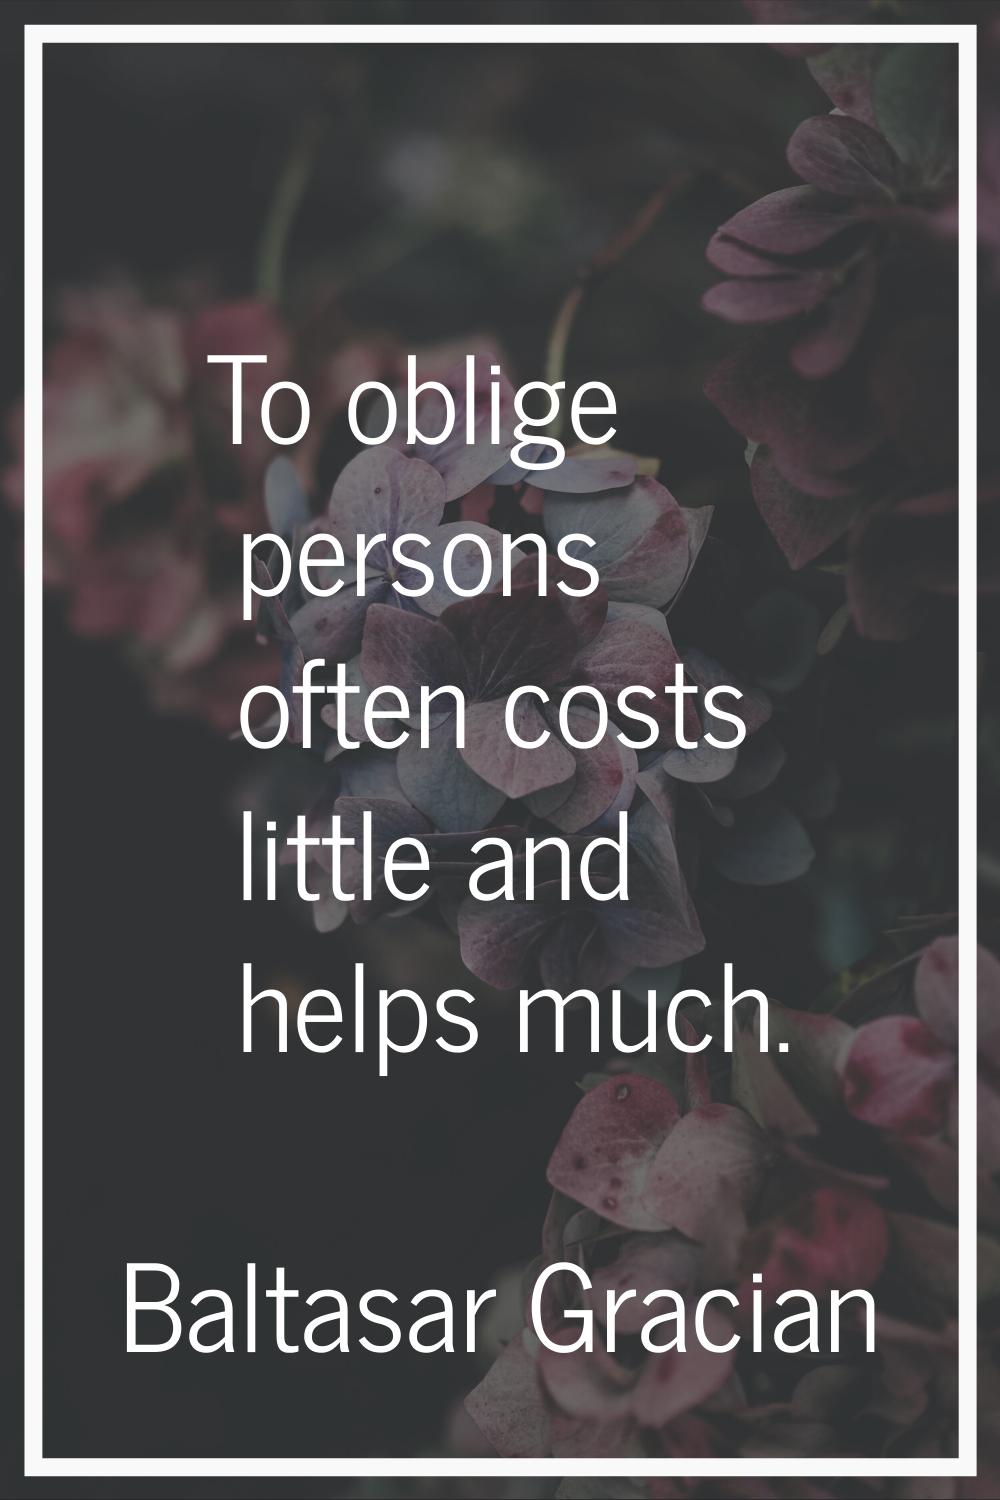 To oblige persons often costs little and helps much.